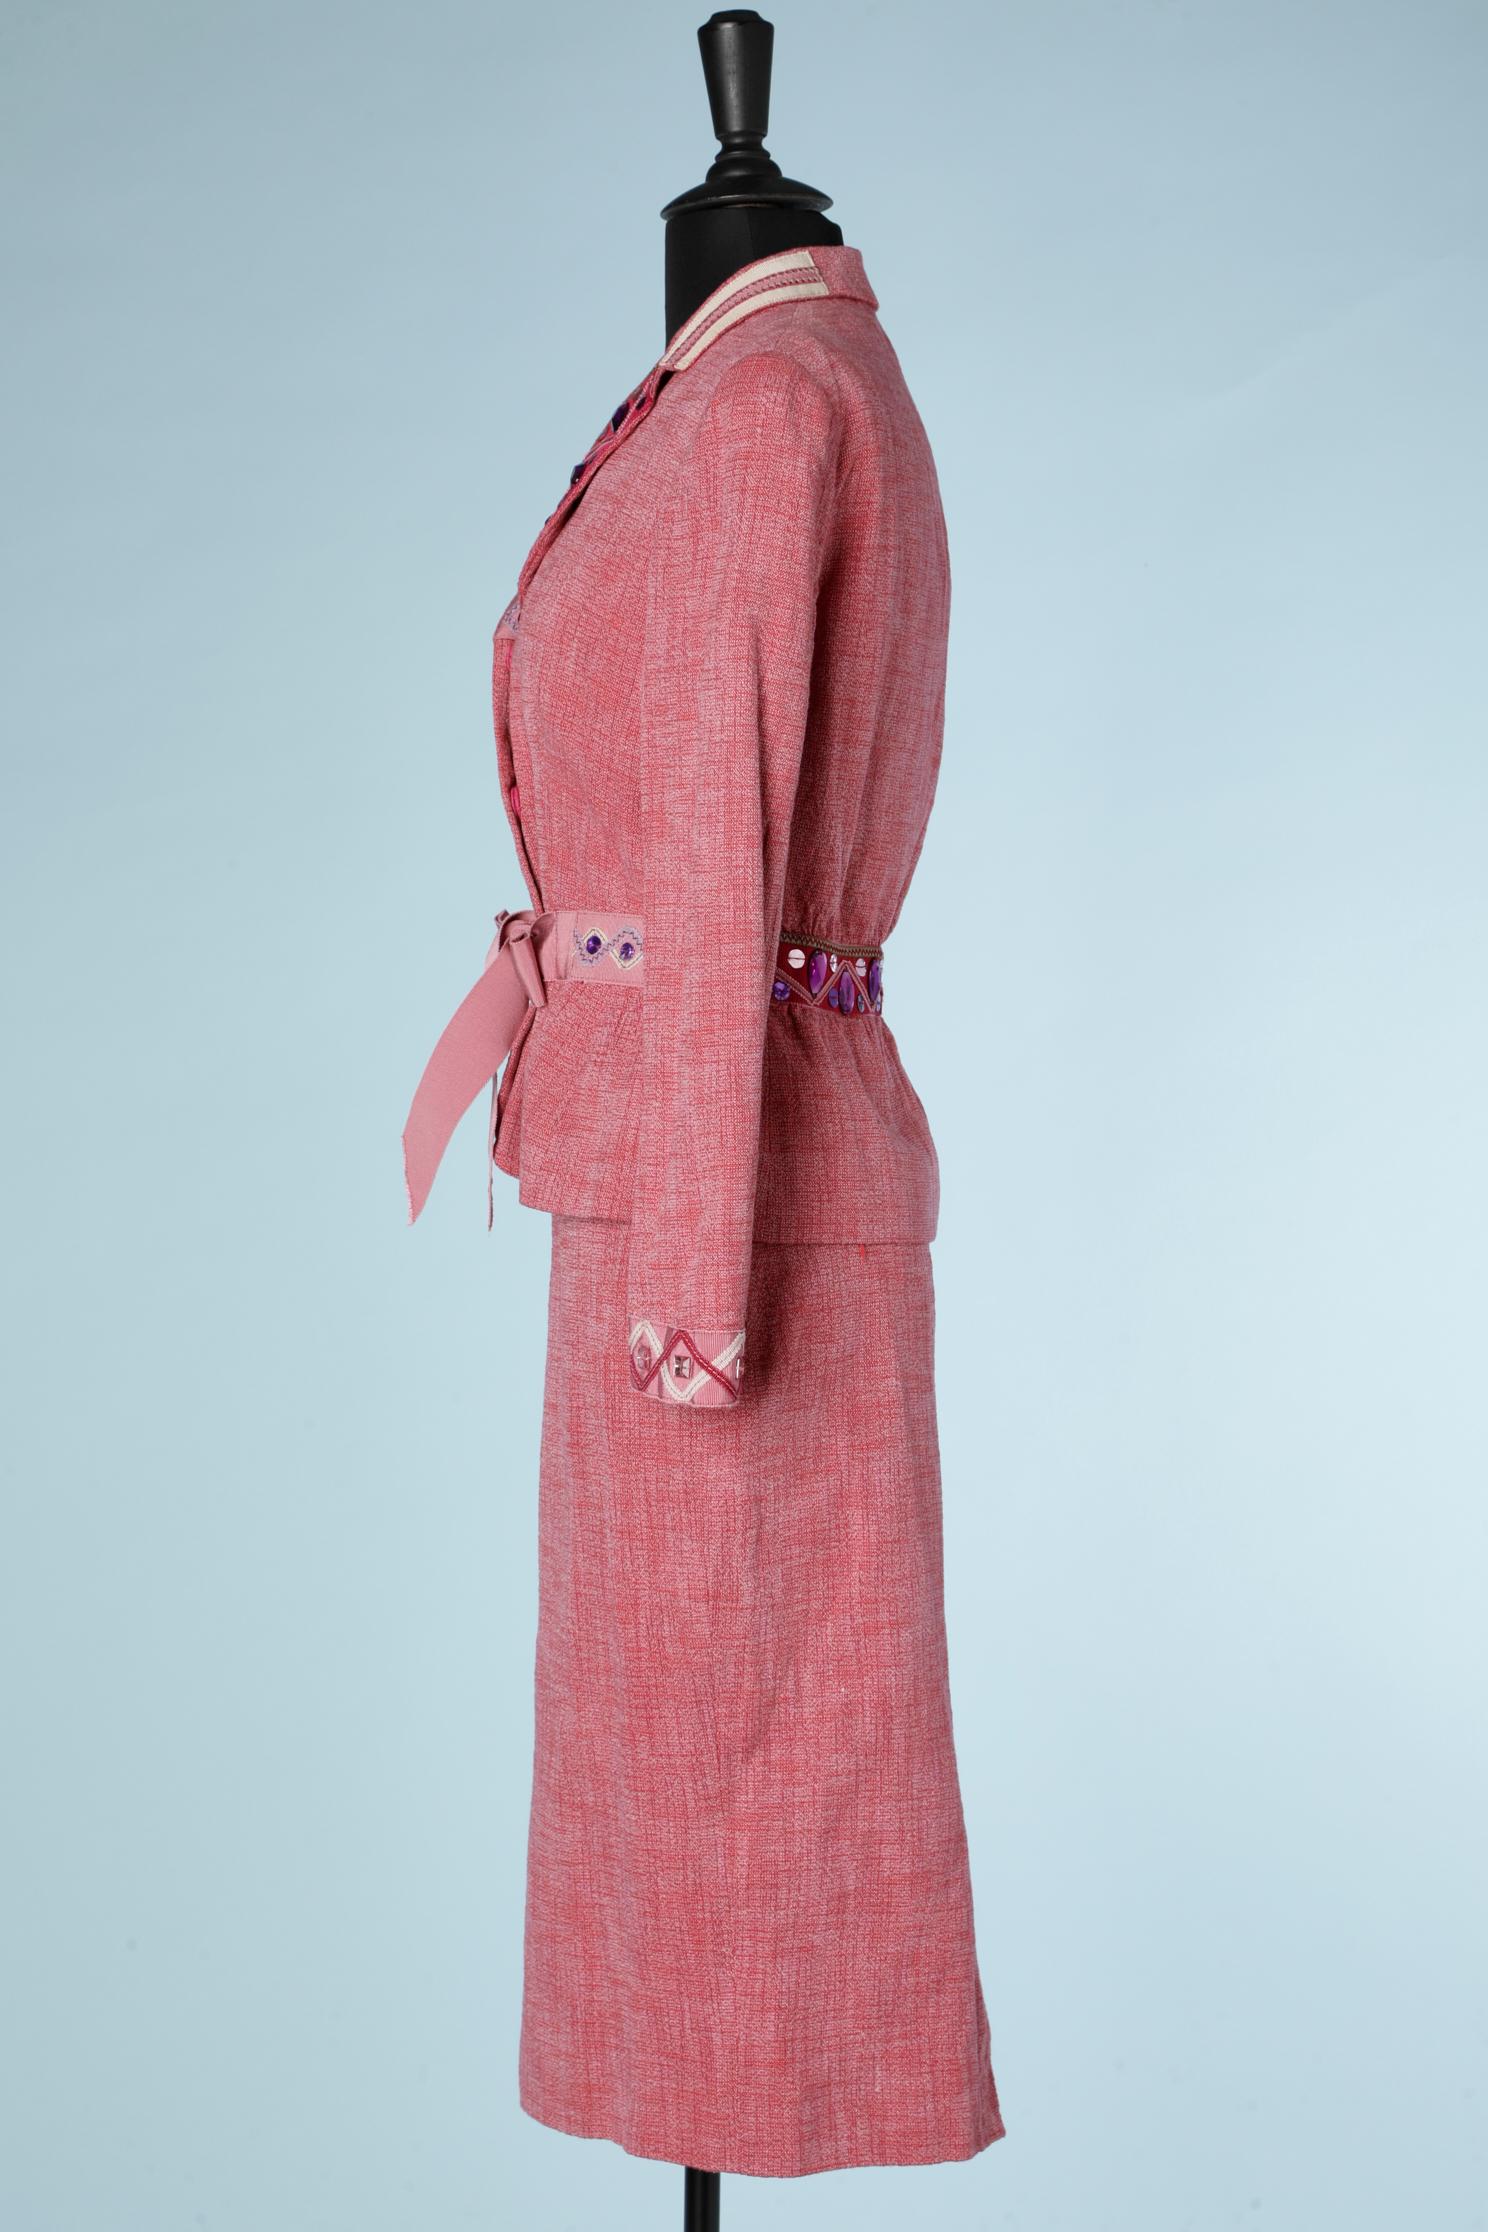 Pink skirt-suit with cabochons and ribbons embellishment Moschino Cheap and Chic For Sale 1